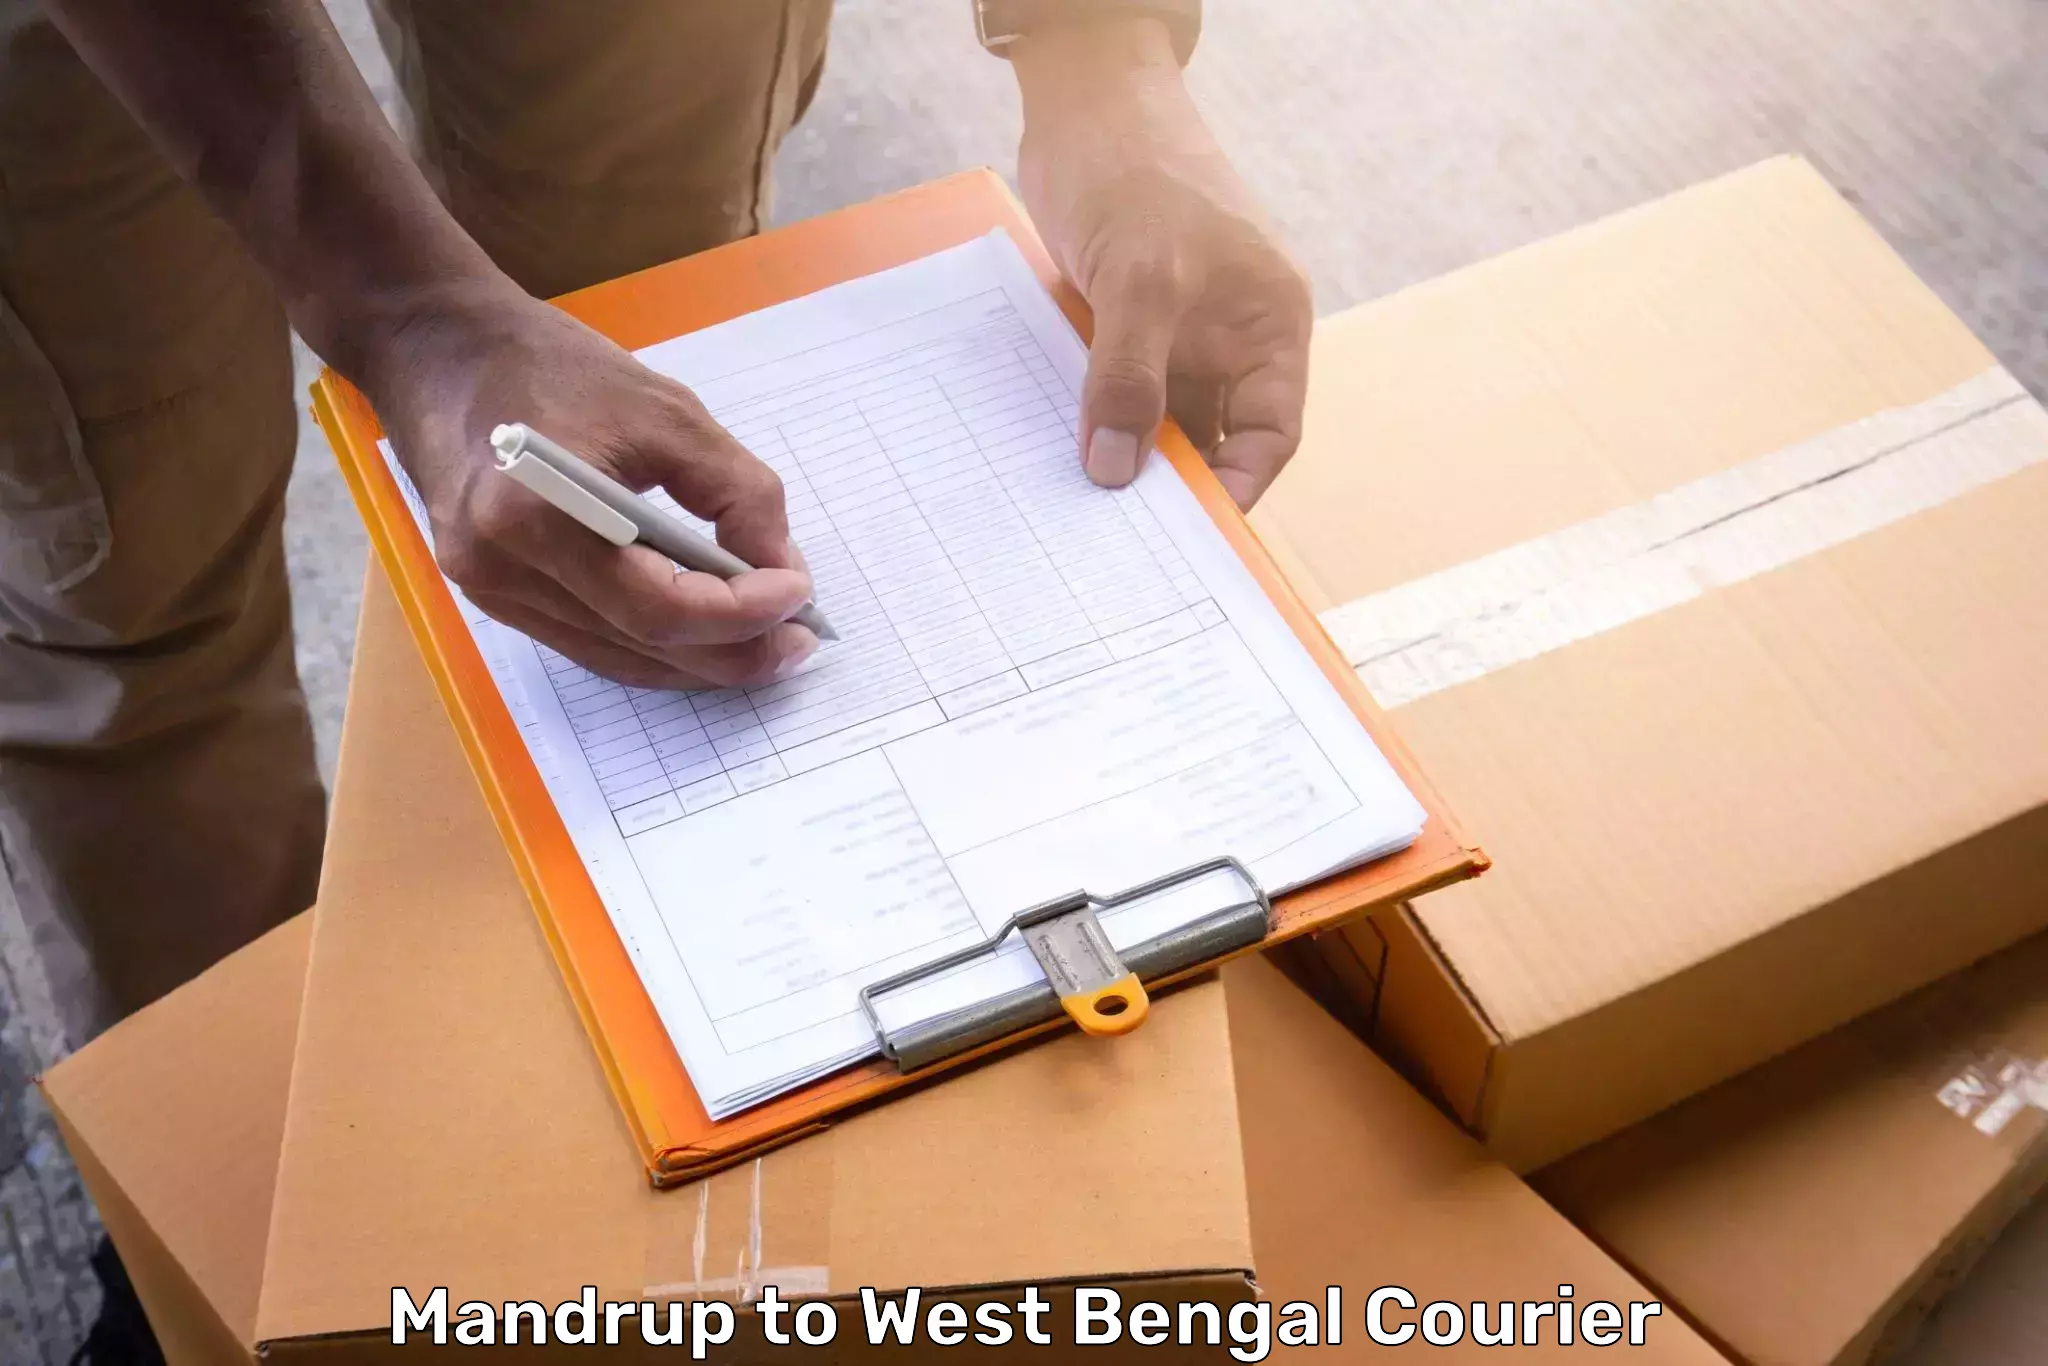 Baggage relocation service Mandrup to West Bengal